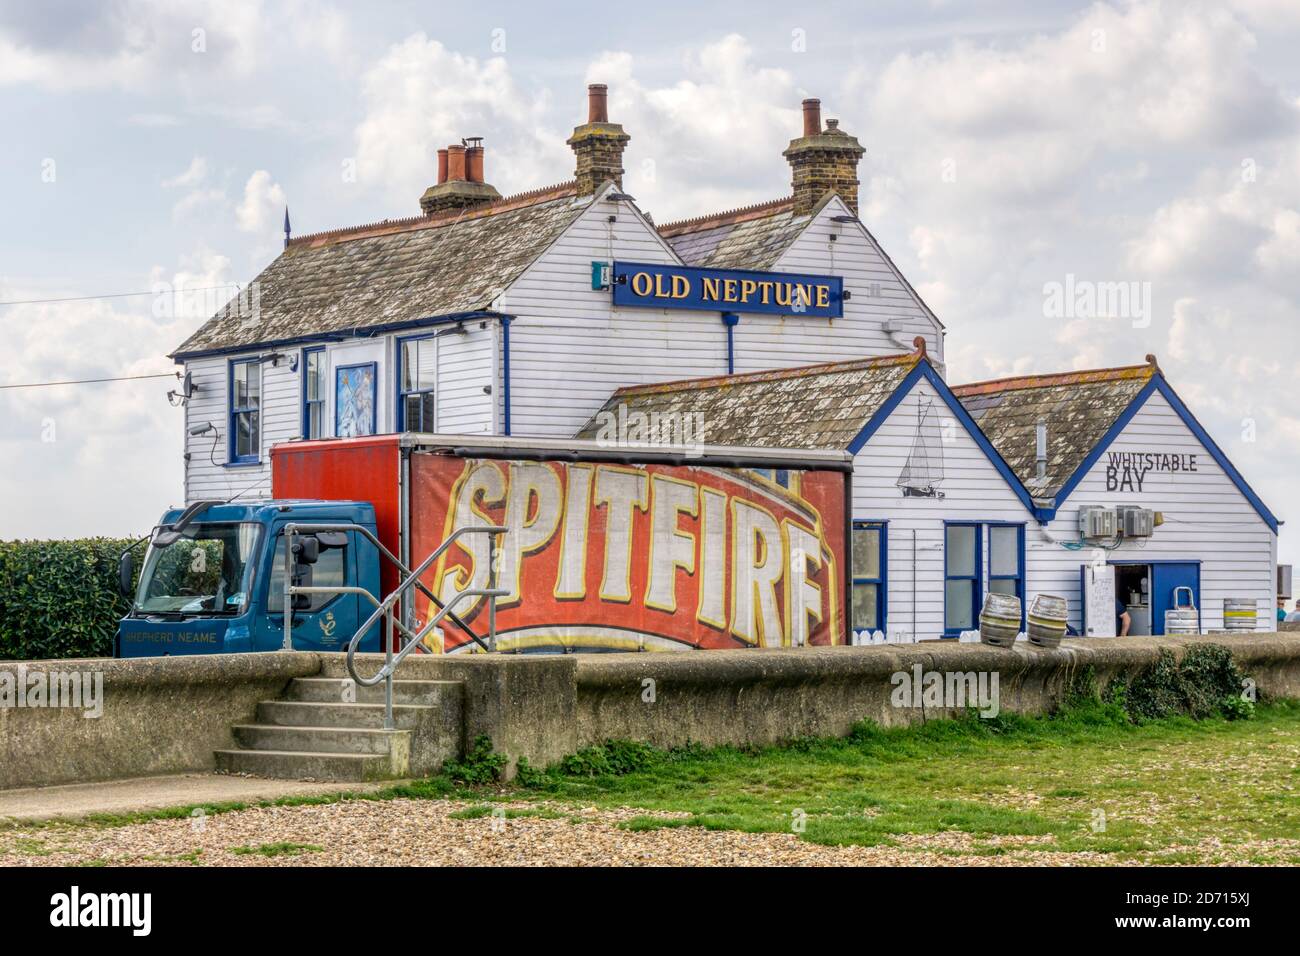 Shepherd Neame lorry delivering Spitfire beer to The Old Neptune pub in Whitstable. Stock Photo